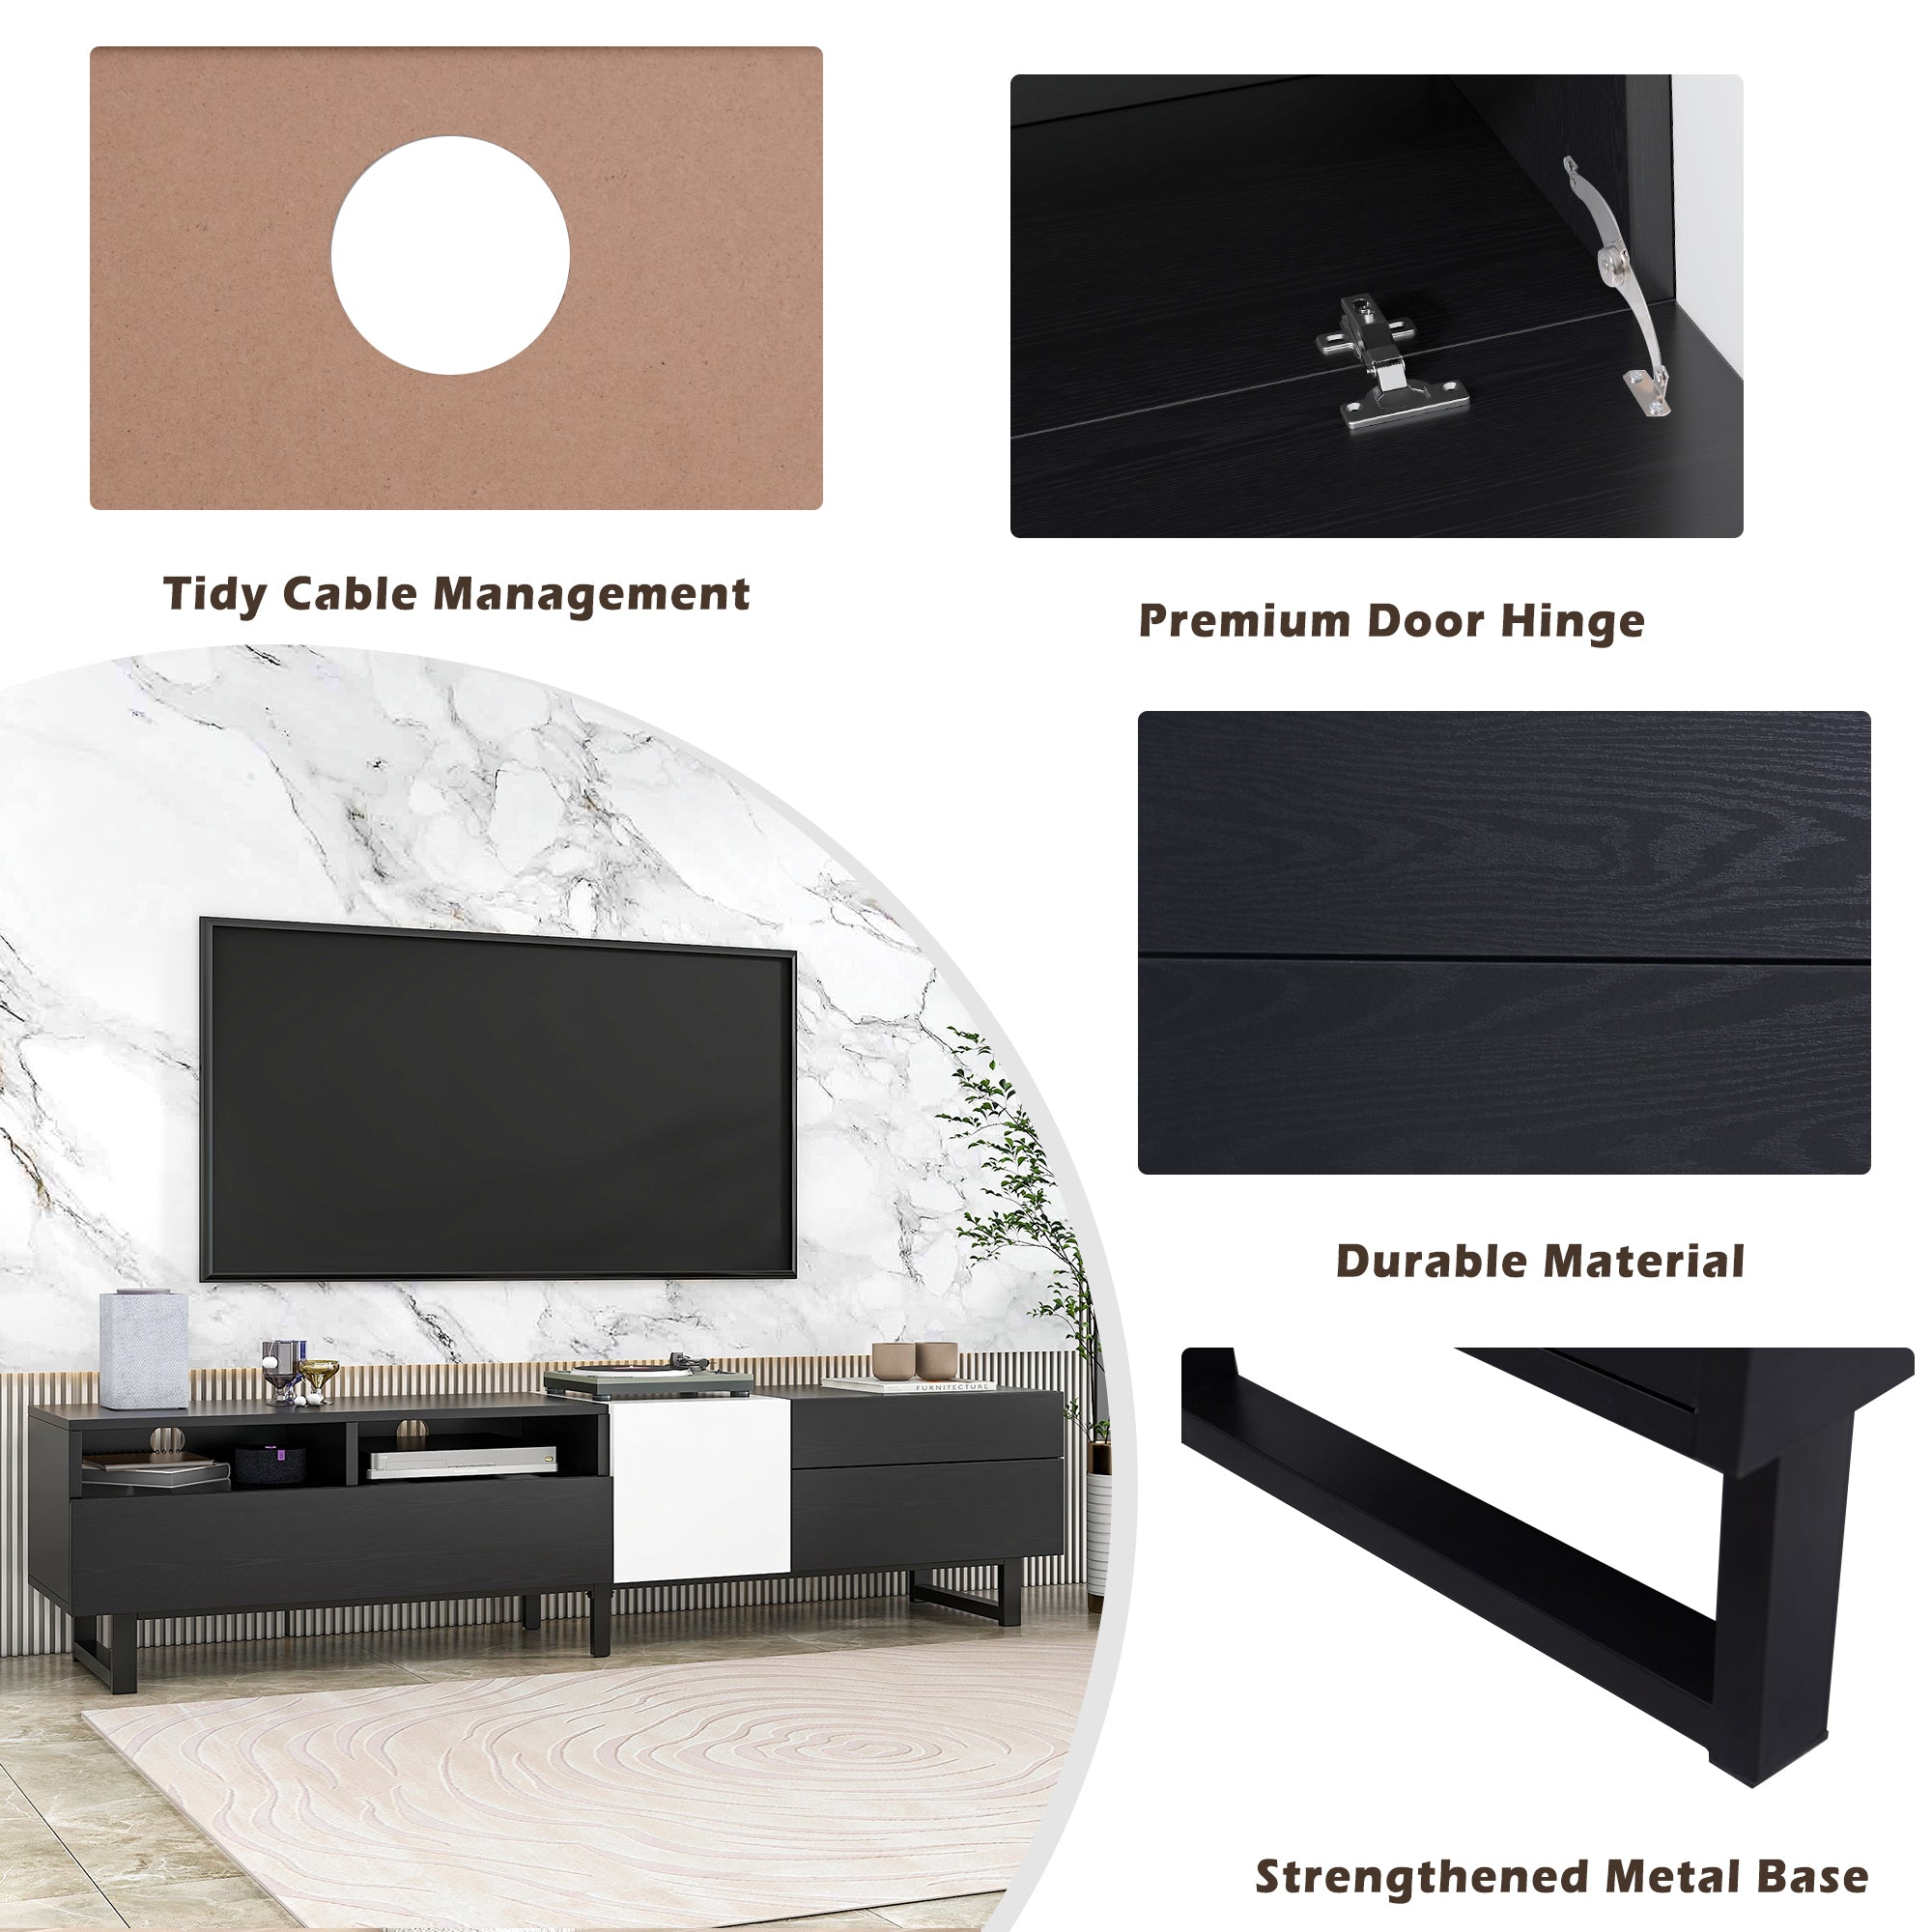 Modern TV Stand for 80'' TV with Double Storage Space black-mdf